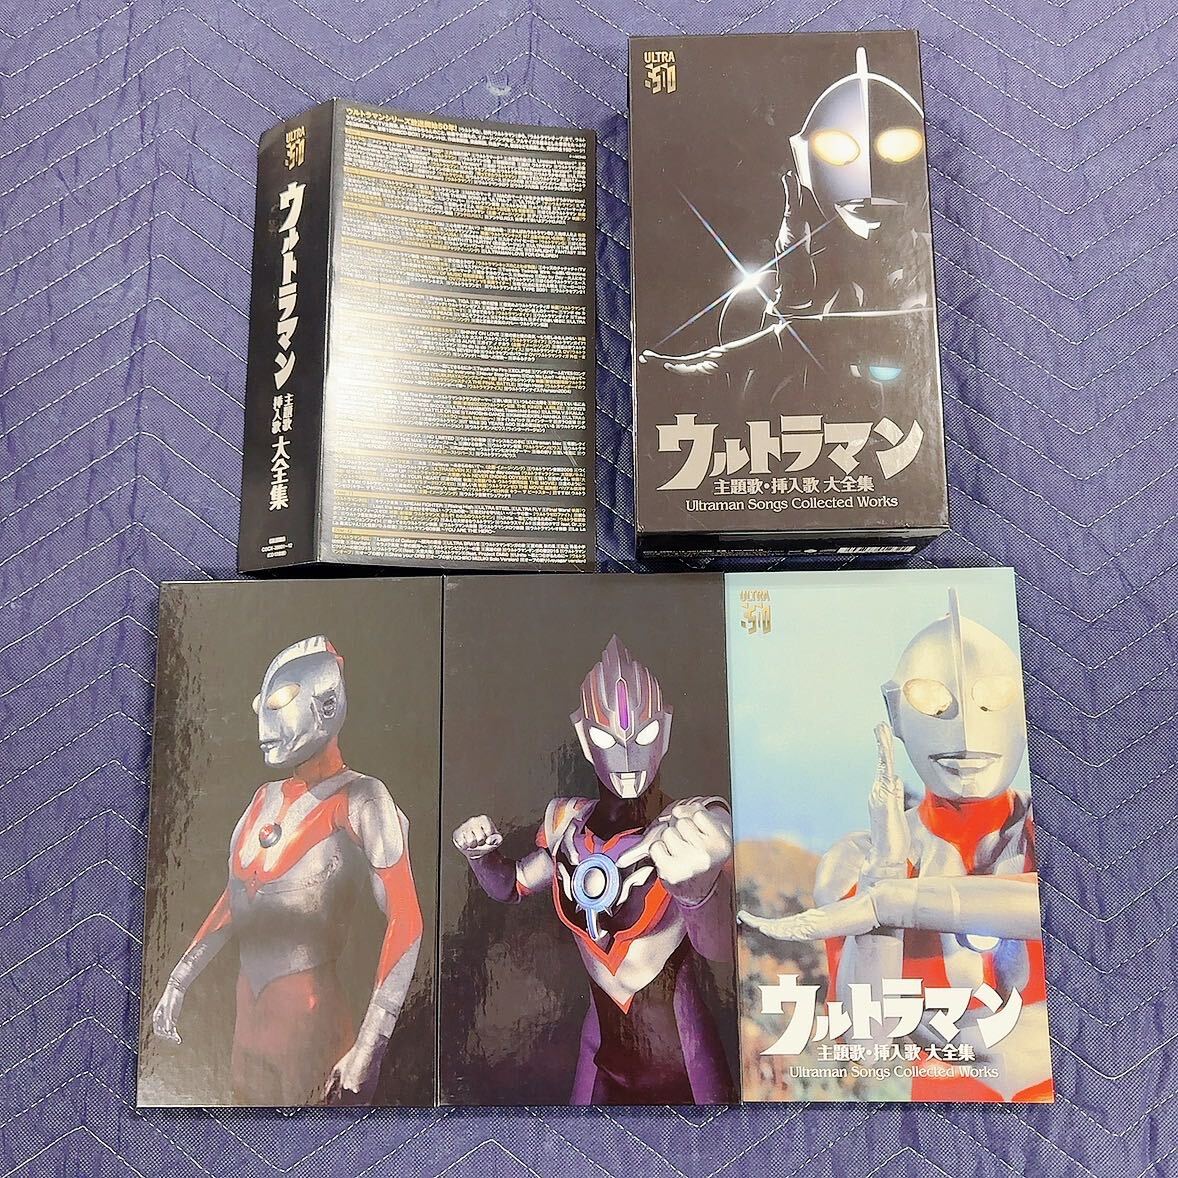 【S1】ウルトラマン 主題歌・挿入歌 大全集 Ultraman Songs Collected Works の画像1